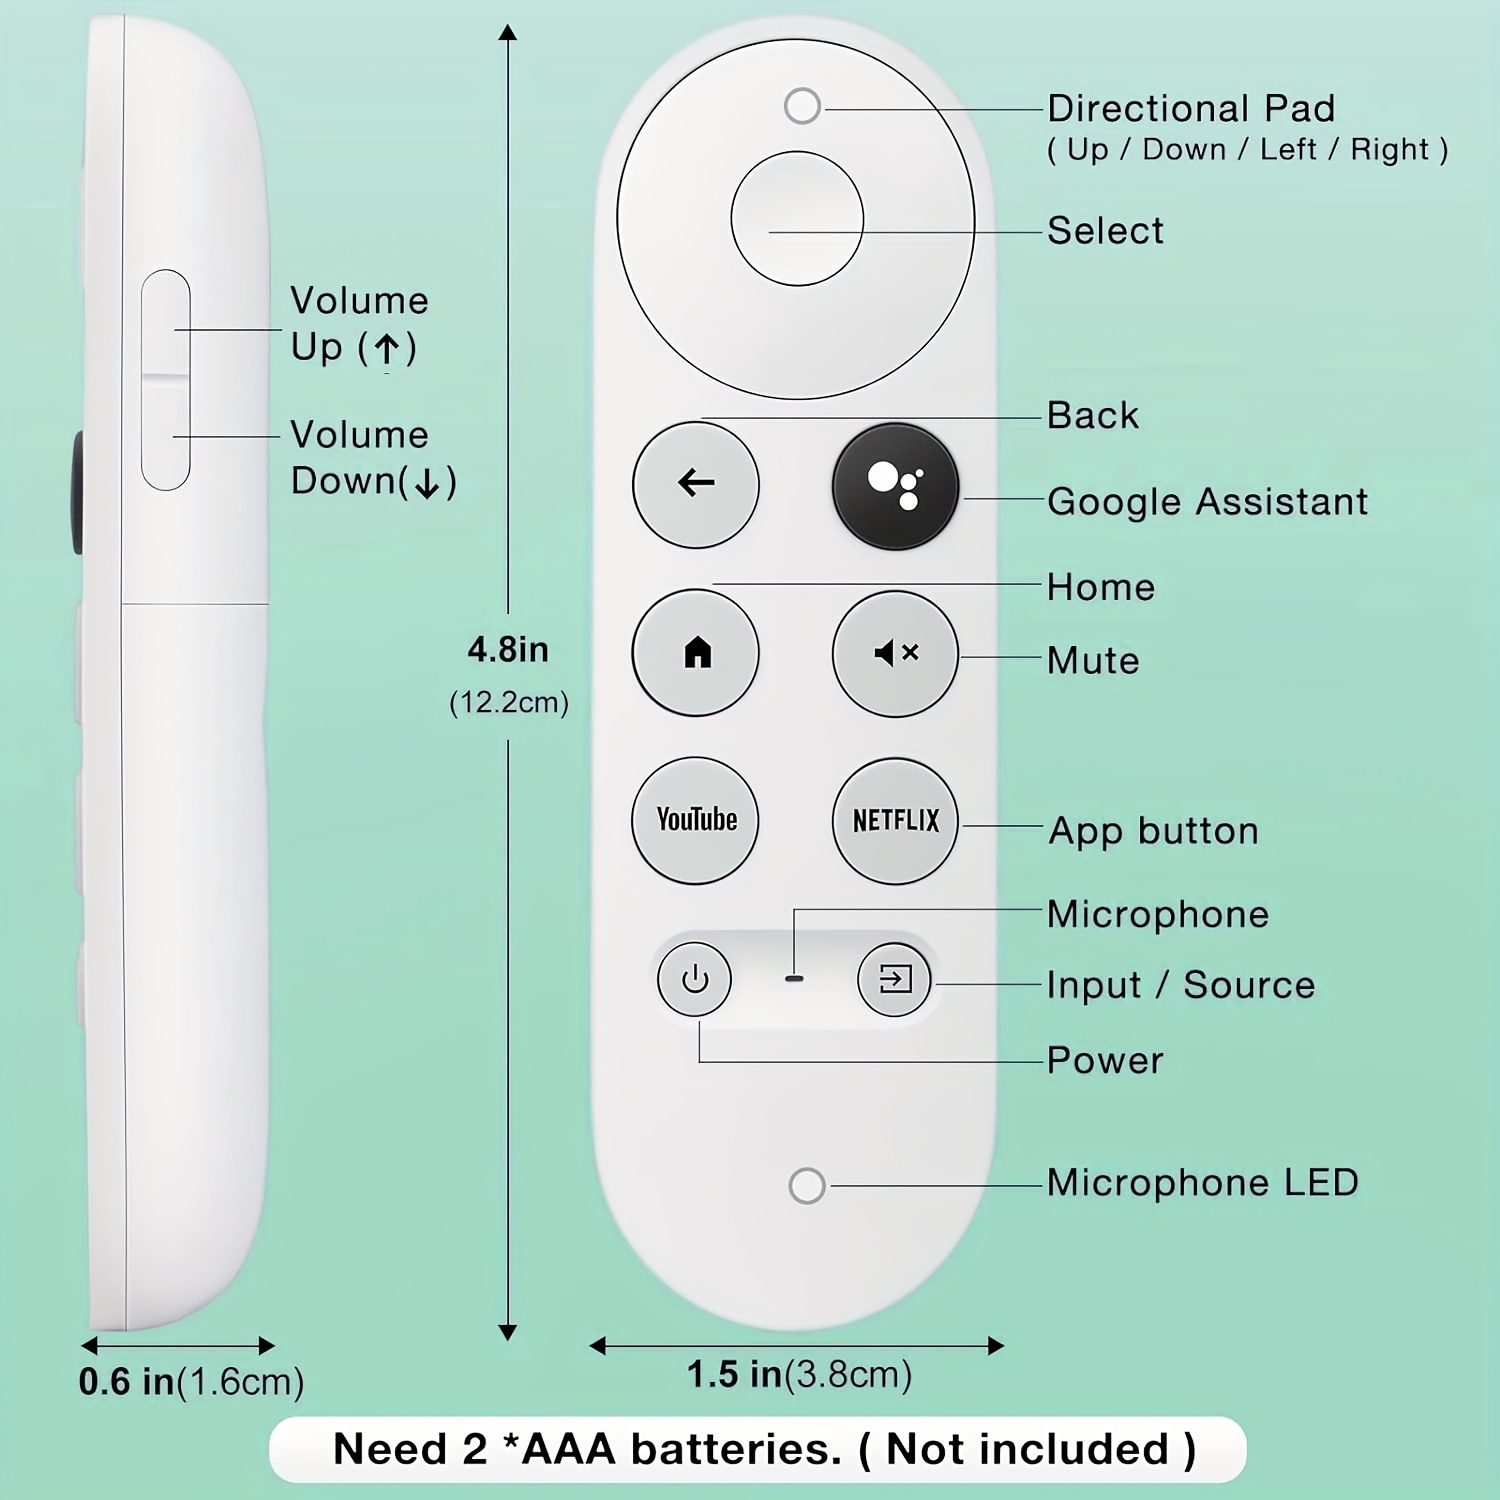 Durable Replacement Voice Function Tv Remote Control Compatible Google  Chromecast 4k Snow Streaming Media Player Compatible G9n9n, Ga01920-us,  Ga01923